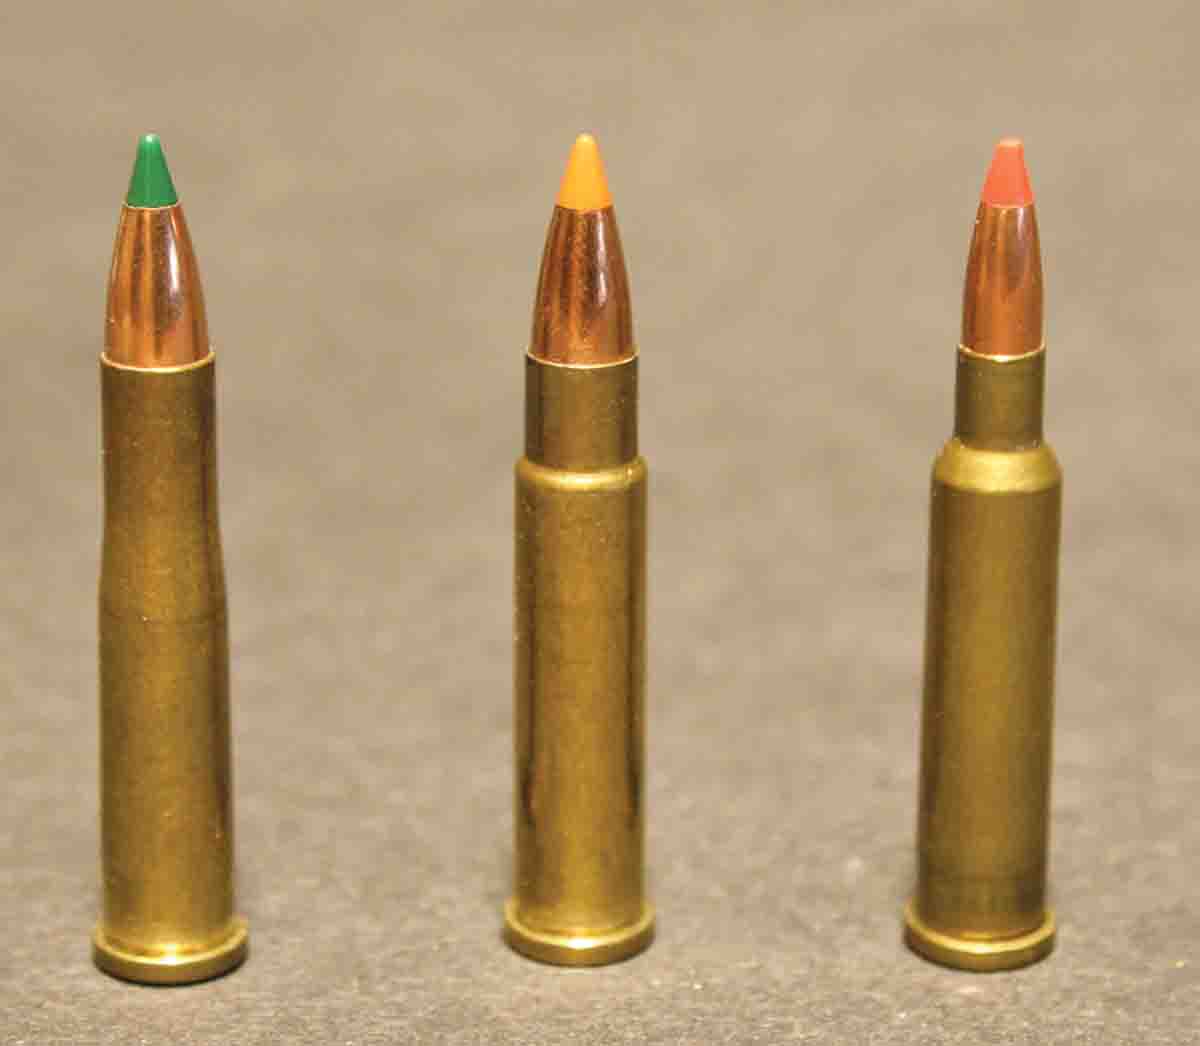 The .17 Ackley Hornet (right) is essentially a necked-down version of the .22 K-Hornet (center), an “improved” version of the standard .22 Hornet (left).